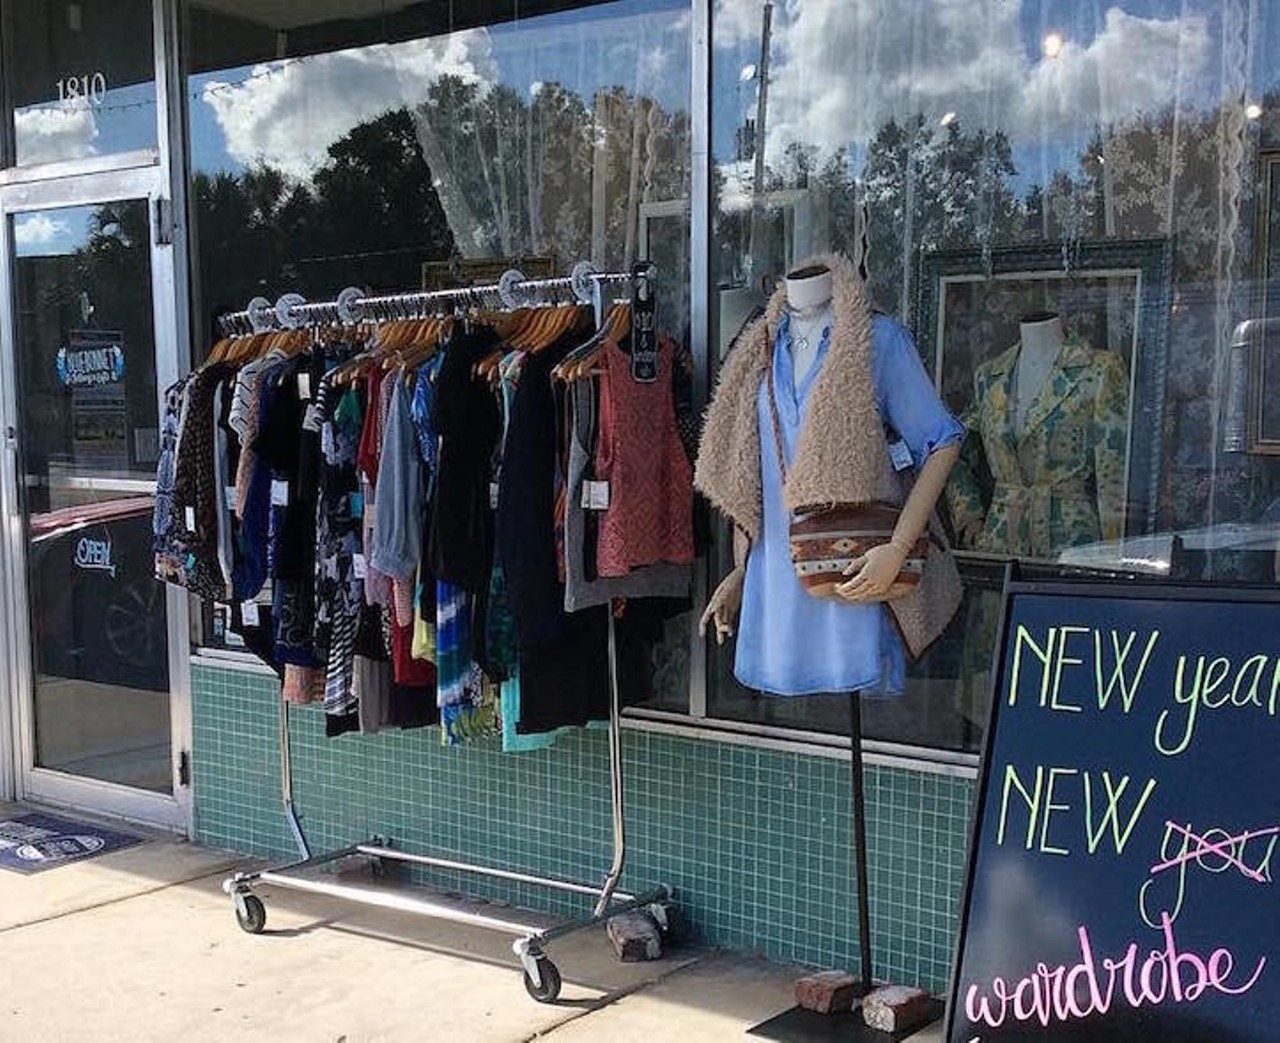 Bluebonnet
1810 N Orange Ave., 407-730-7942 
The Ivanhoe Village boutique not only sells consignment women&#146;s clothing, it also showcases local jewelry makers and artisans.
Photo via Bluebonnet Orlando/Facebook